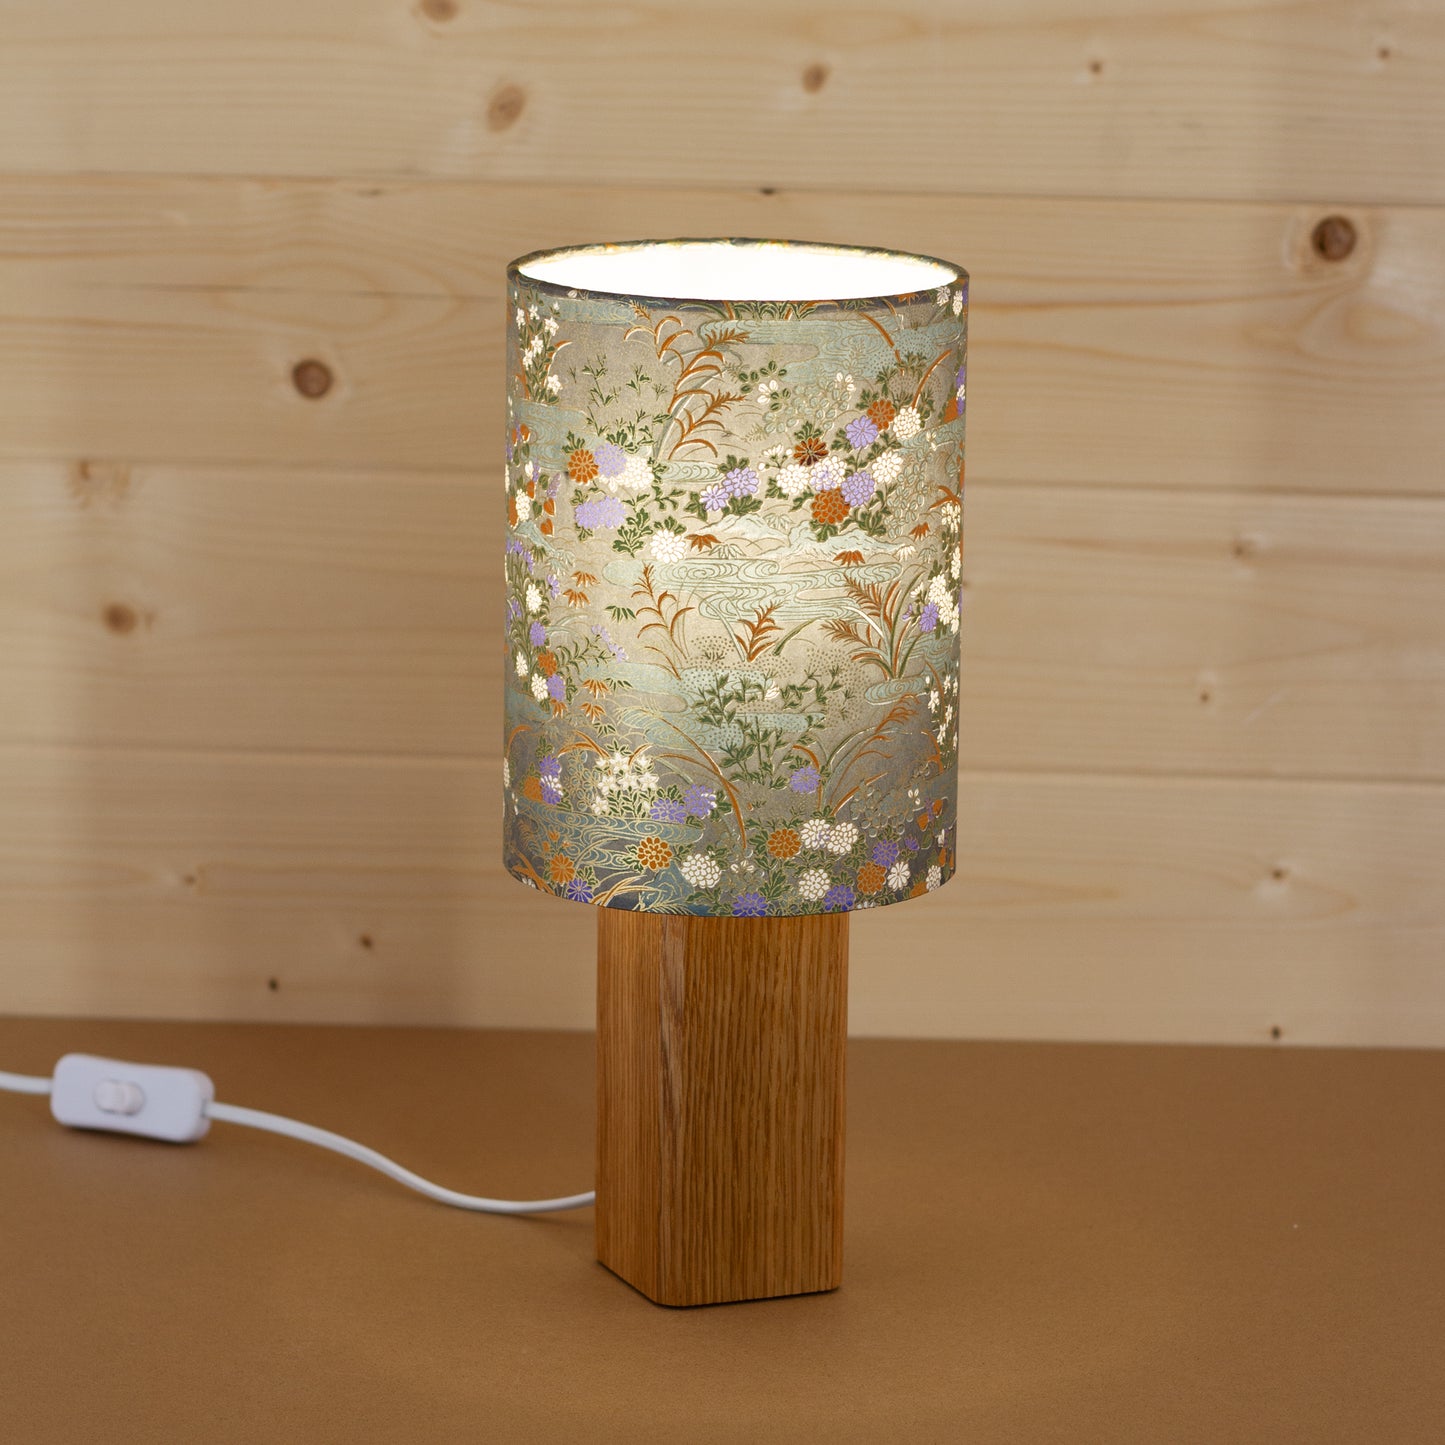 Lit Lily Pond Yuzen Washi Oak Table Lamp, Handmade by Imbue Lighting on the Isle of Anglesey, Wales